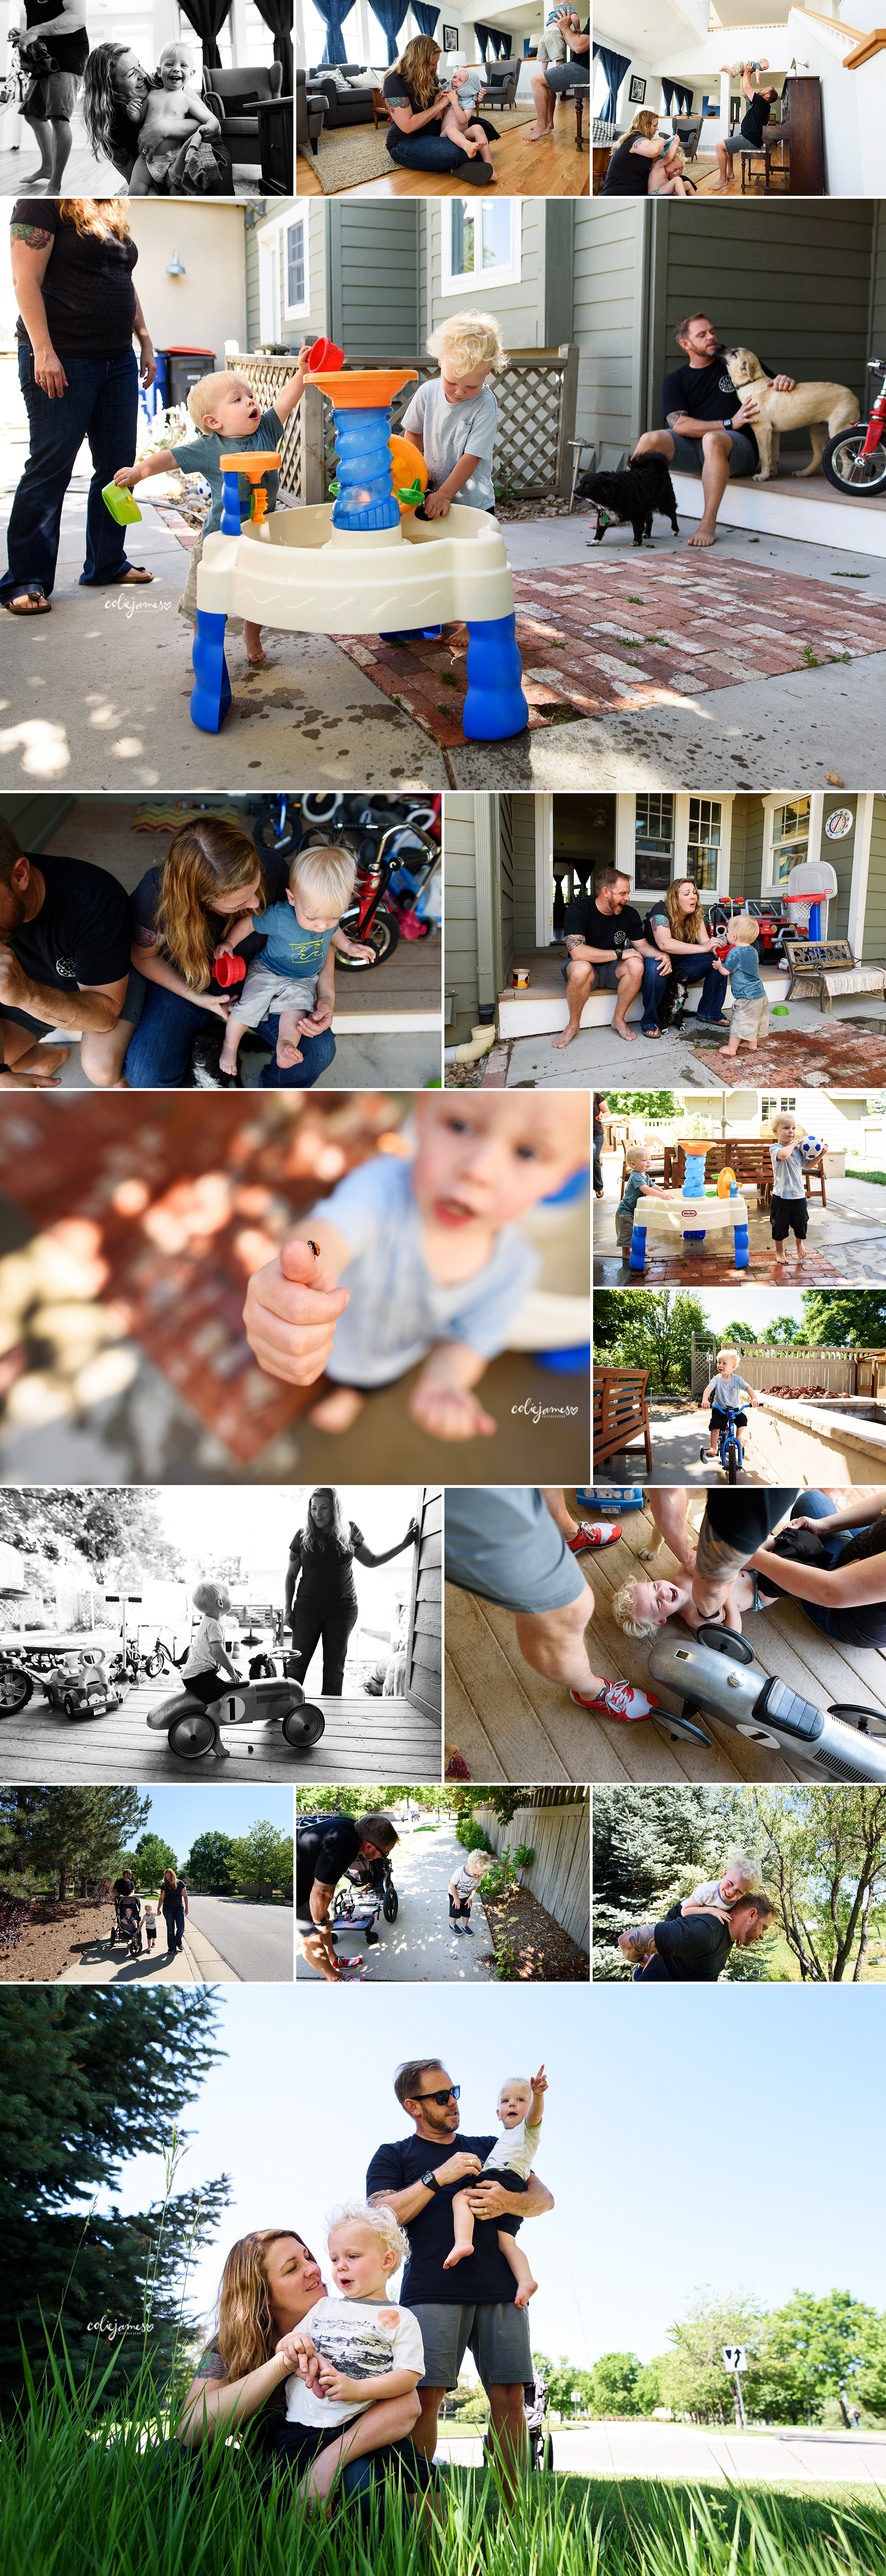 documentary family photography at home sessions colie james